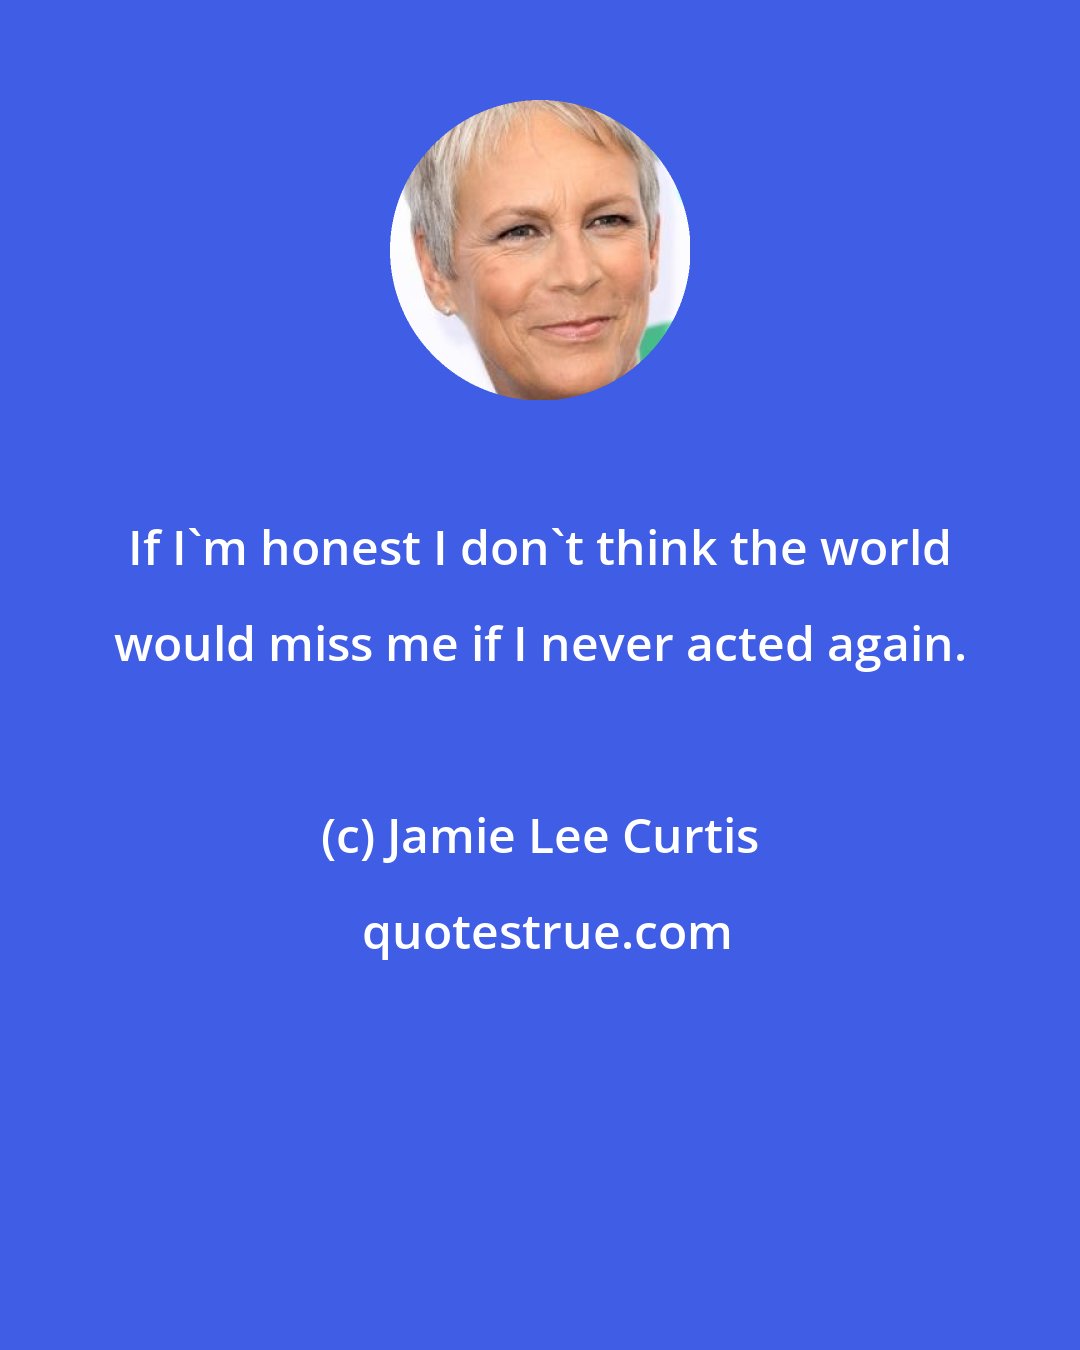 Jamie Lee Curtis: If I'm honest I don't think the world would miss me if I never acted again.